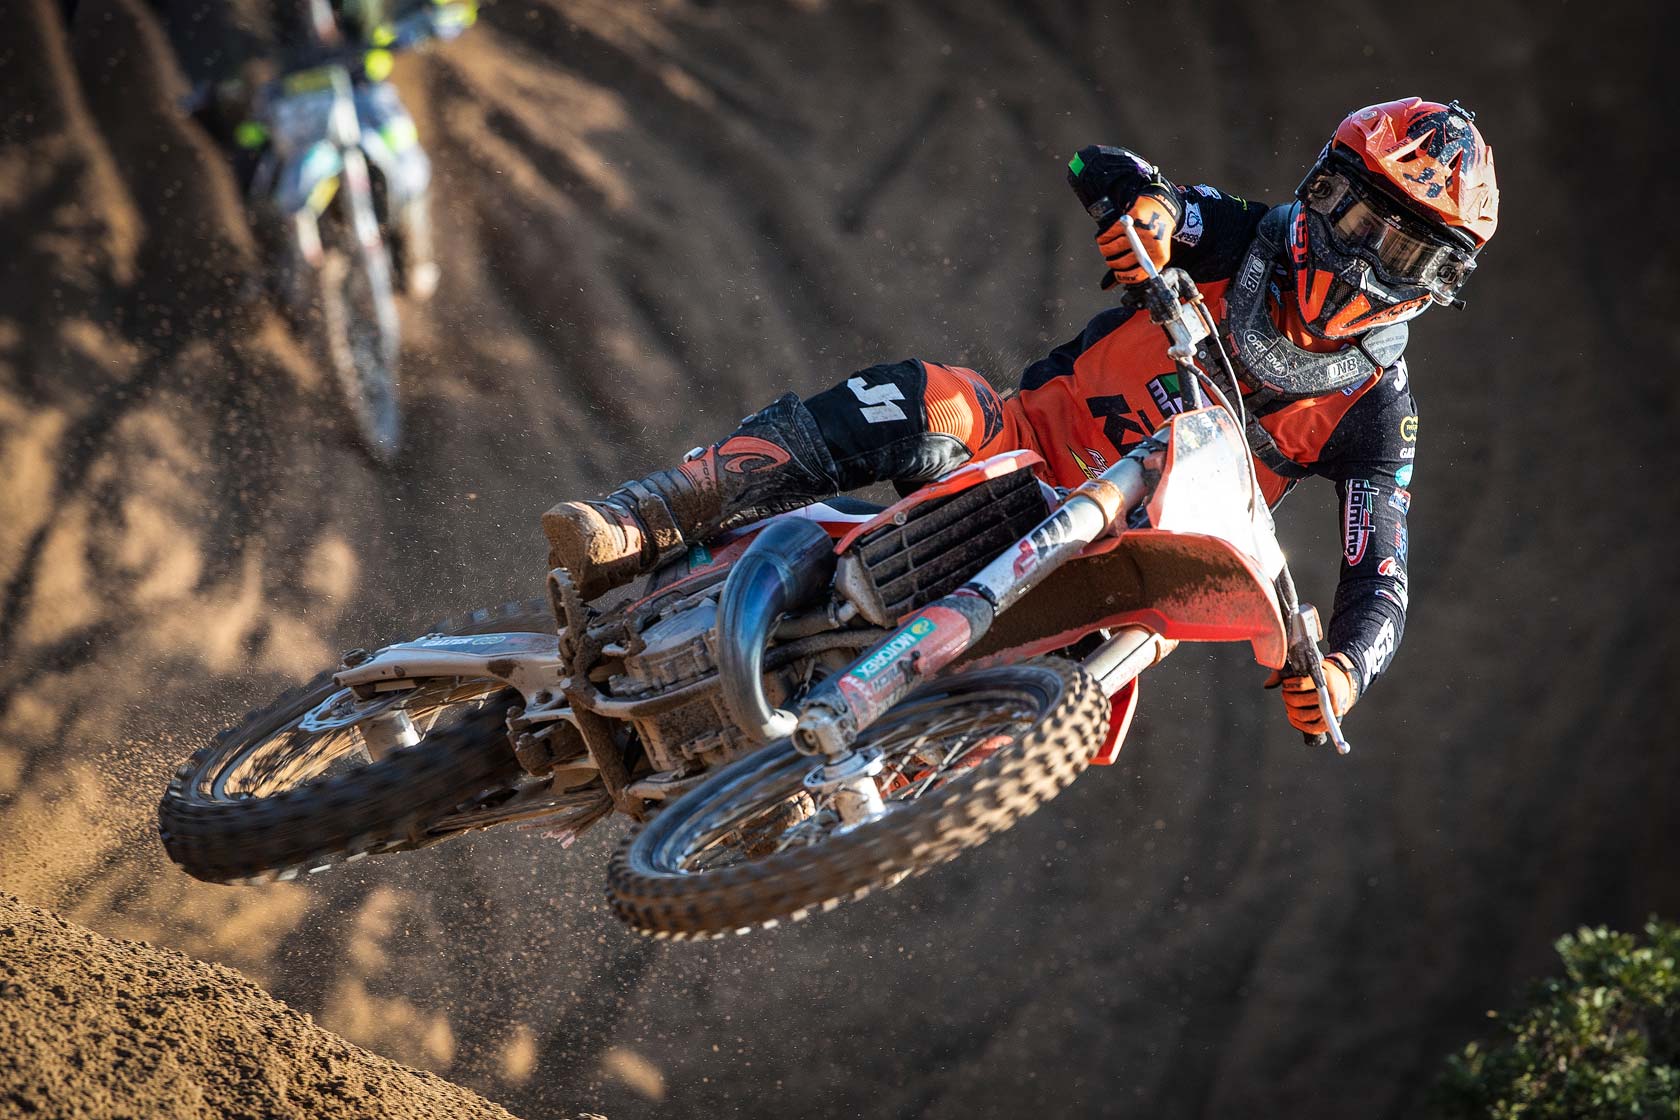 Groundbreaking Program to Showcase Motocross Most Promising Amateur Talent • Total Motorcycle